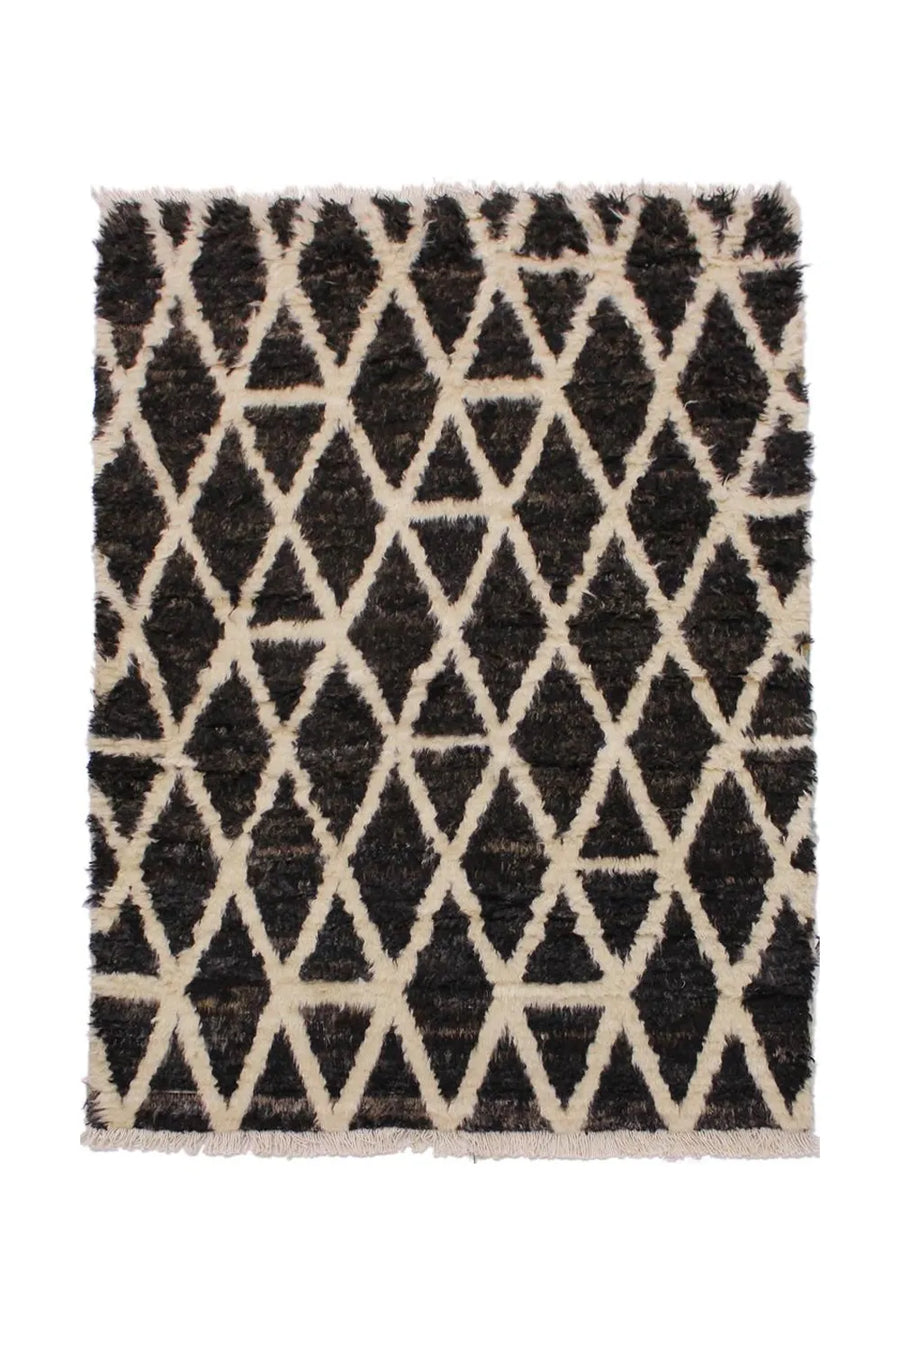 Plush Moroccan shag rug in black and white with a modern geometric pattern.